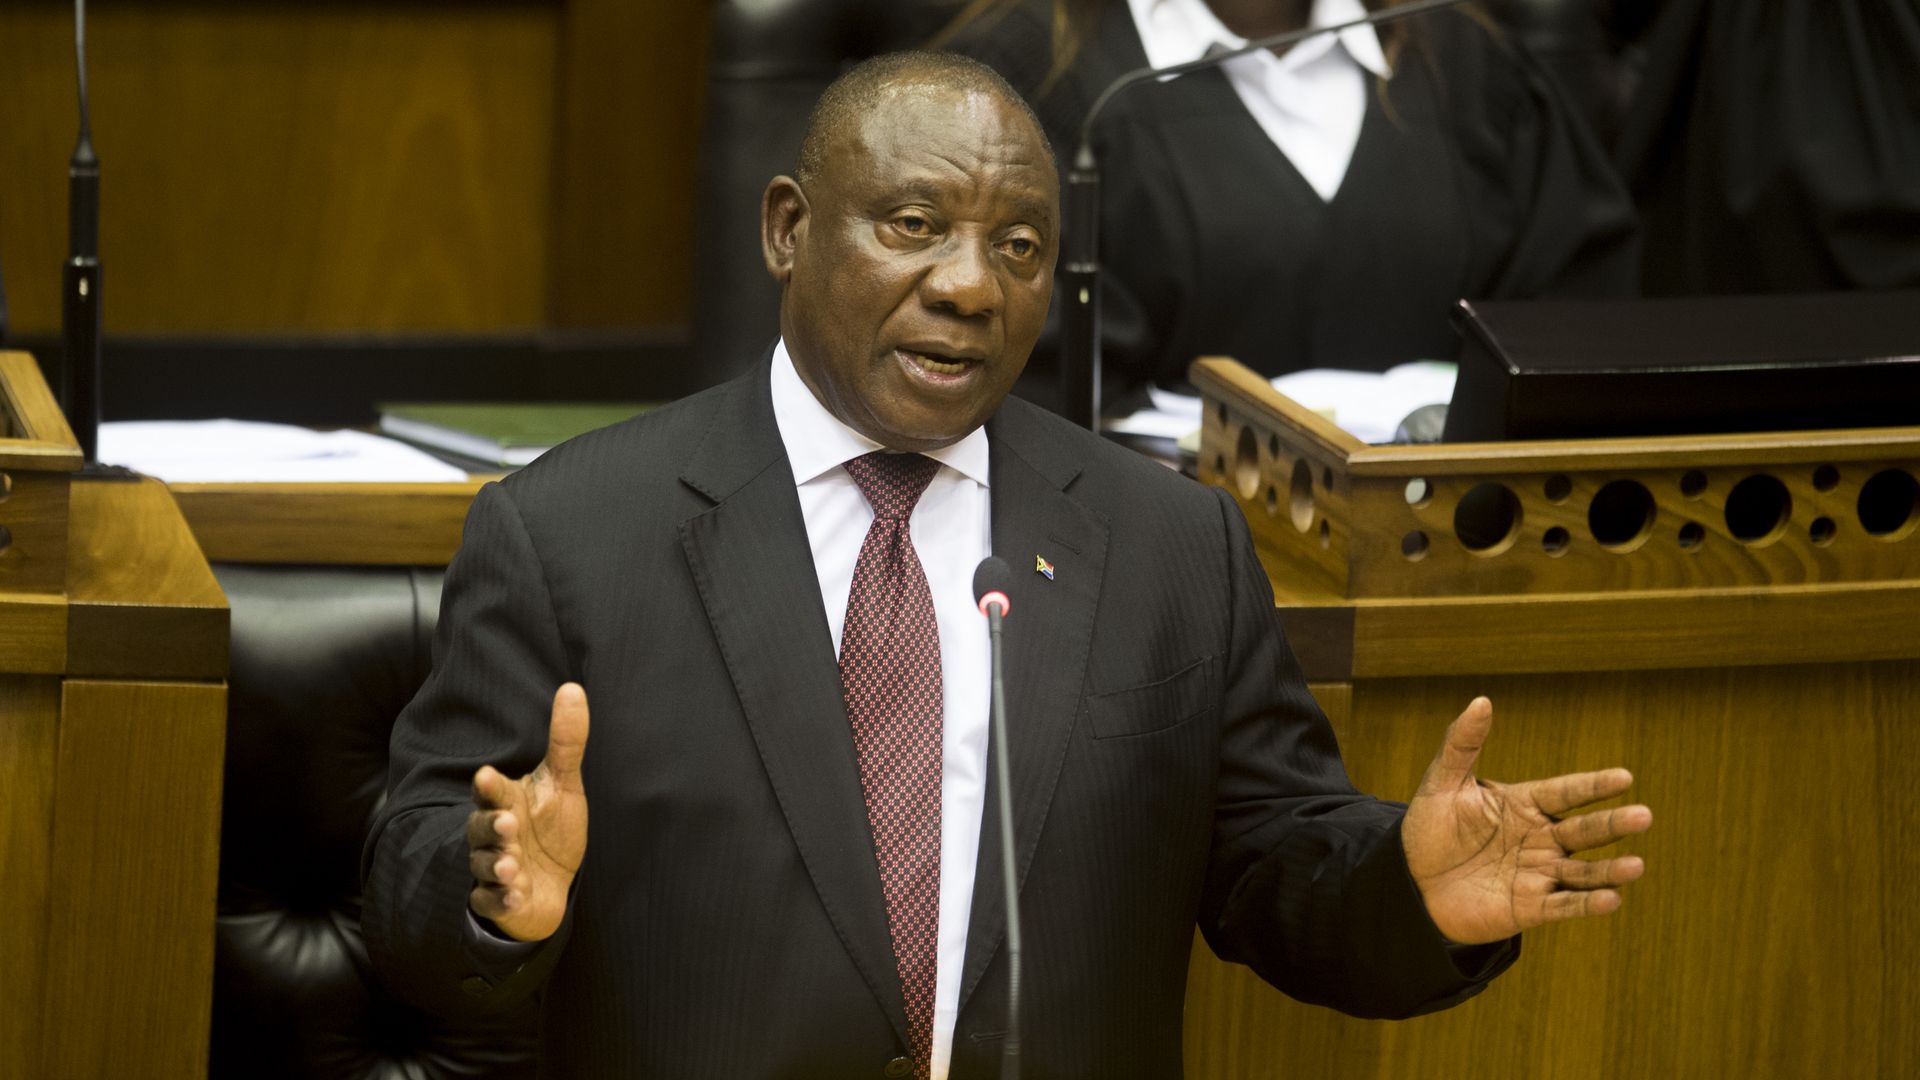 President Cyril Ramaphosa responds during his Question and Answer session in Parliament on March 14, 2018 in Cape Town, South Africa. 